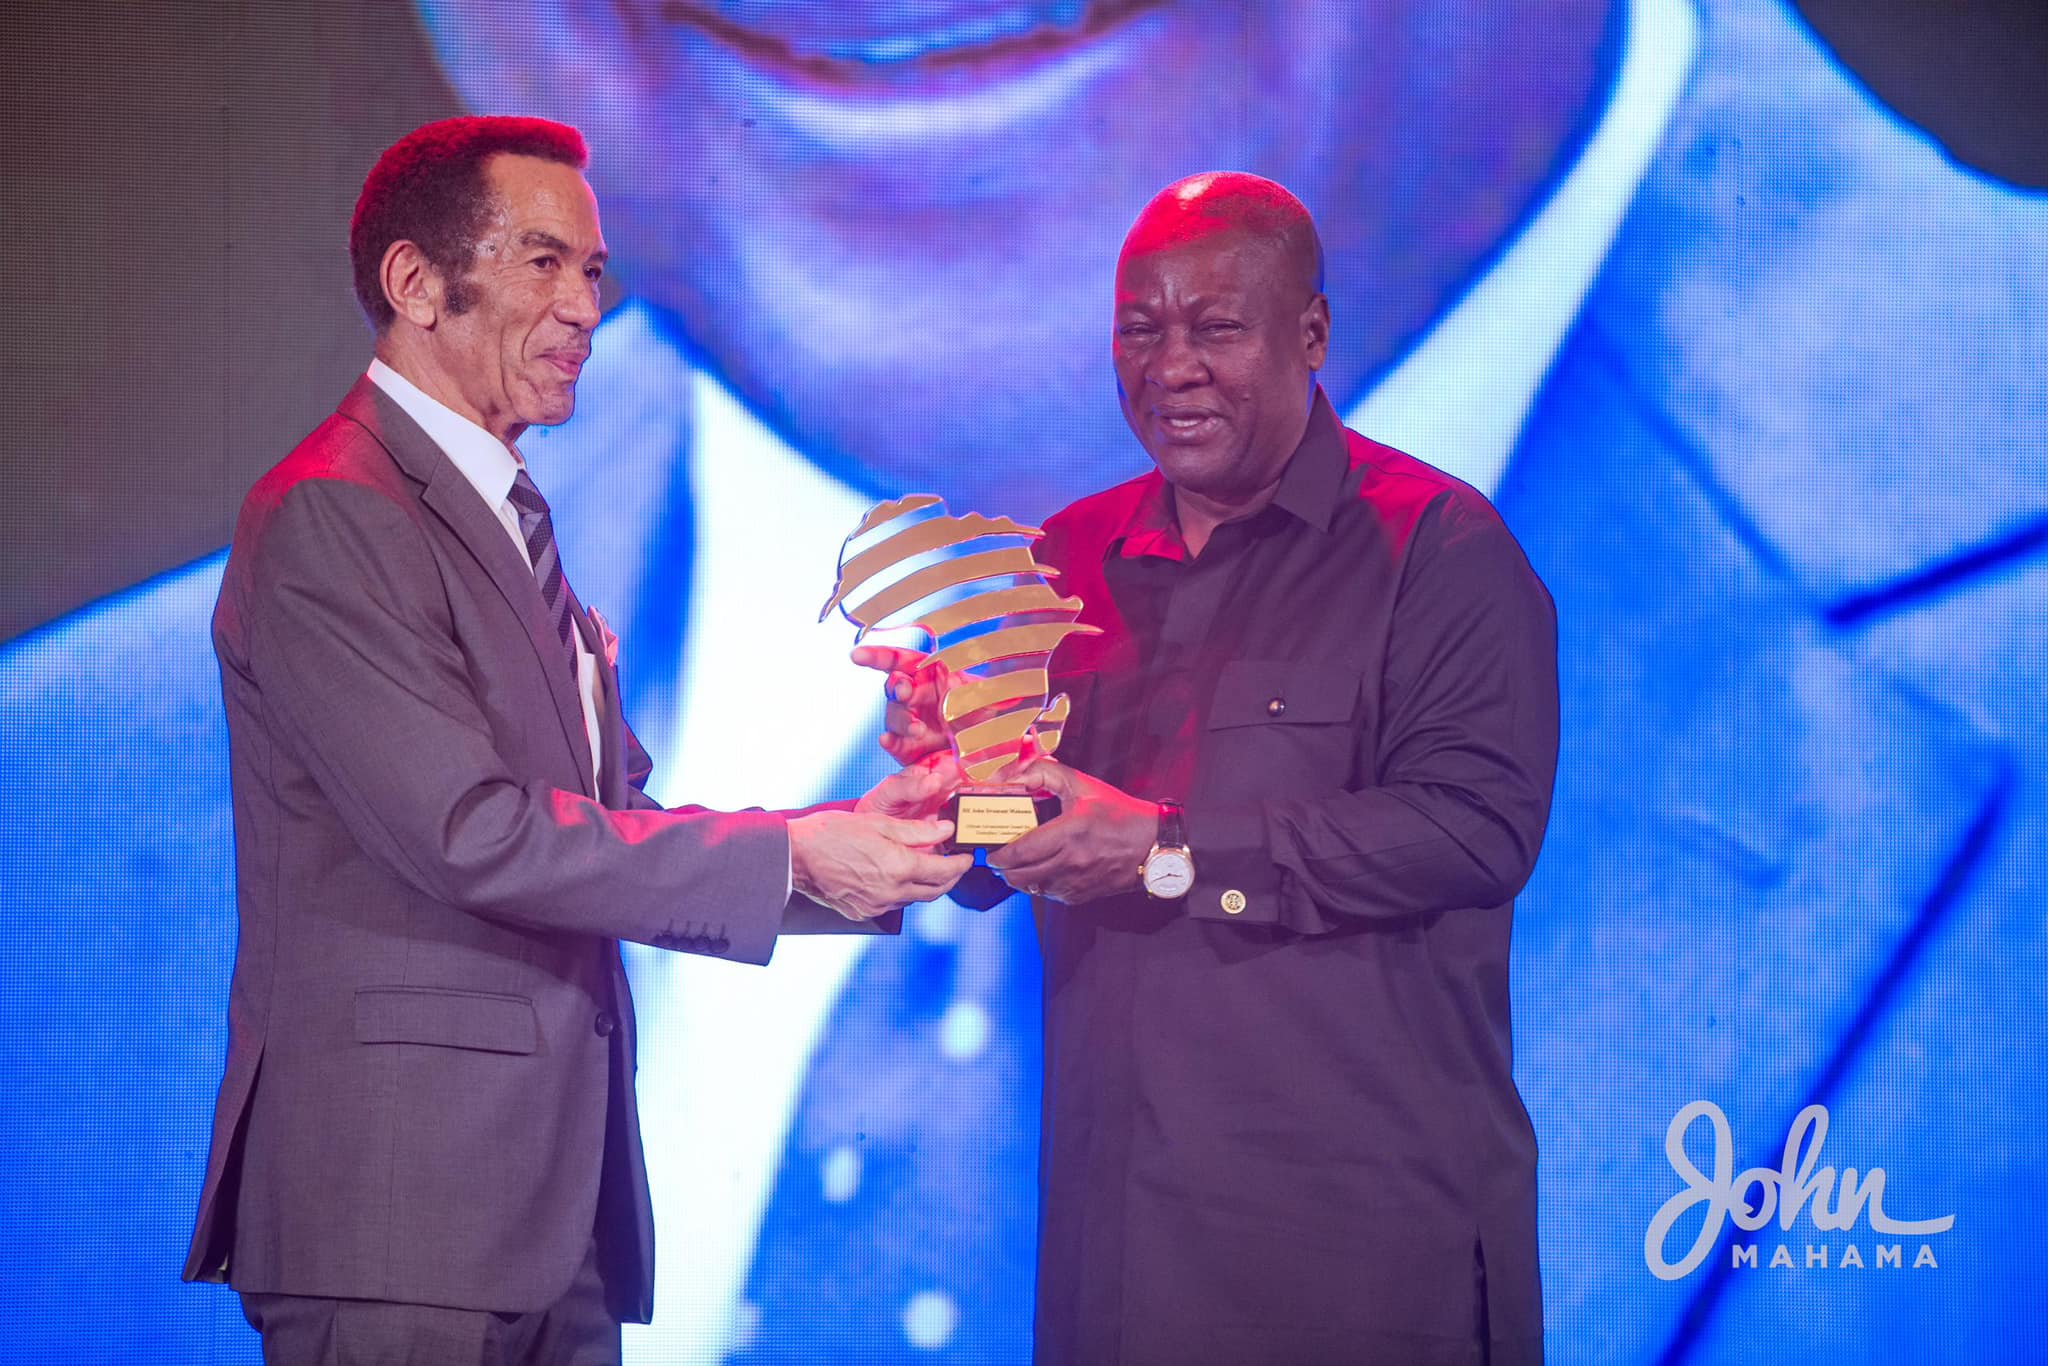 Mahama celebrated at Africa Heritage Awards in Lagos for his exemplary leadership